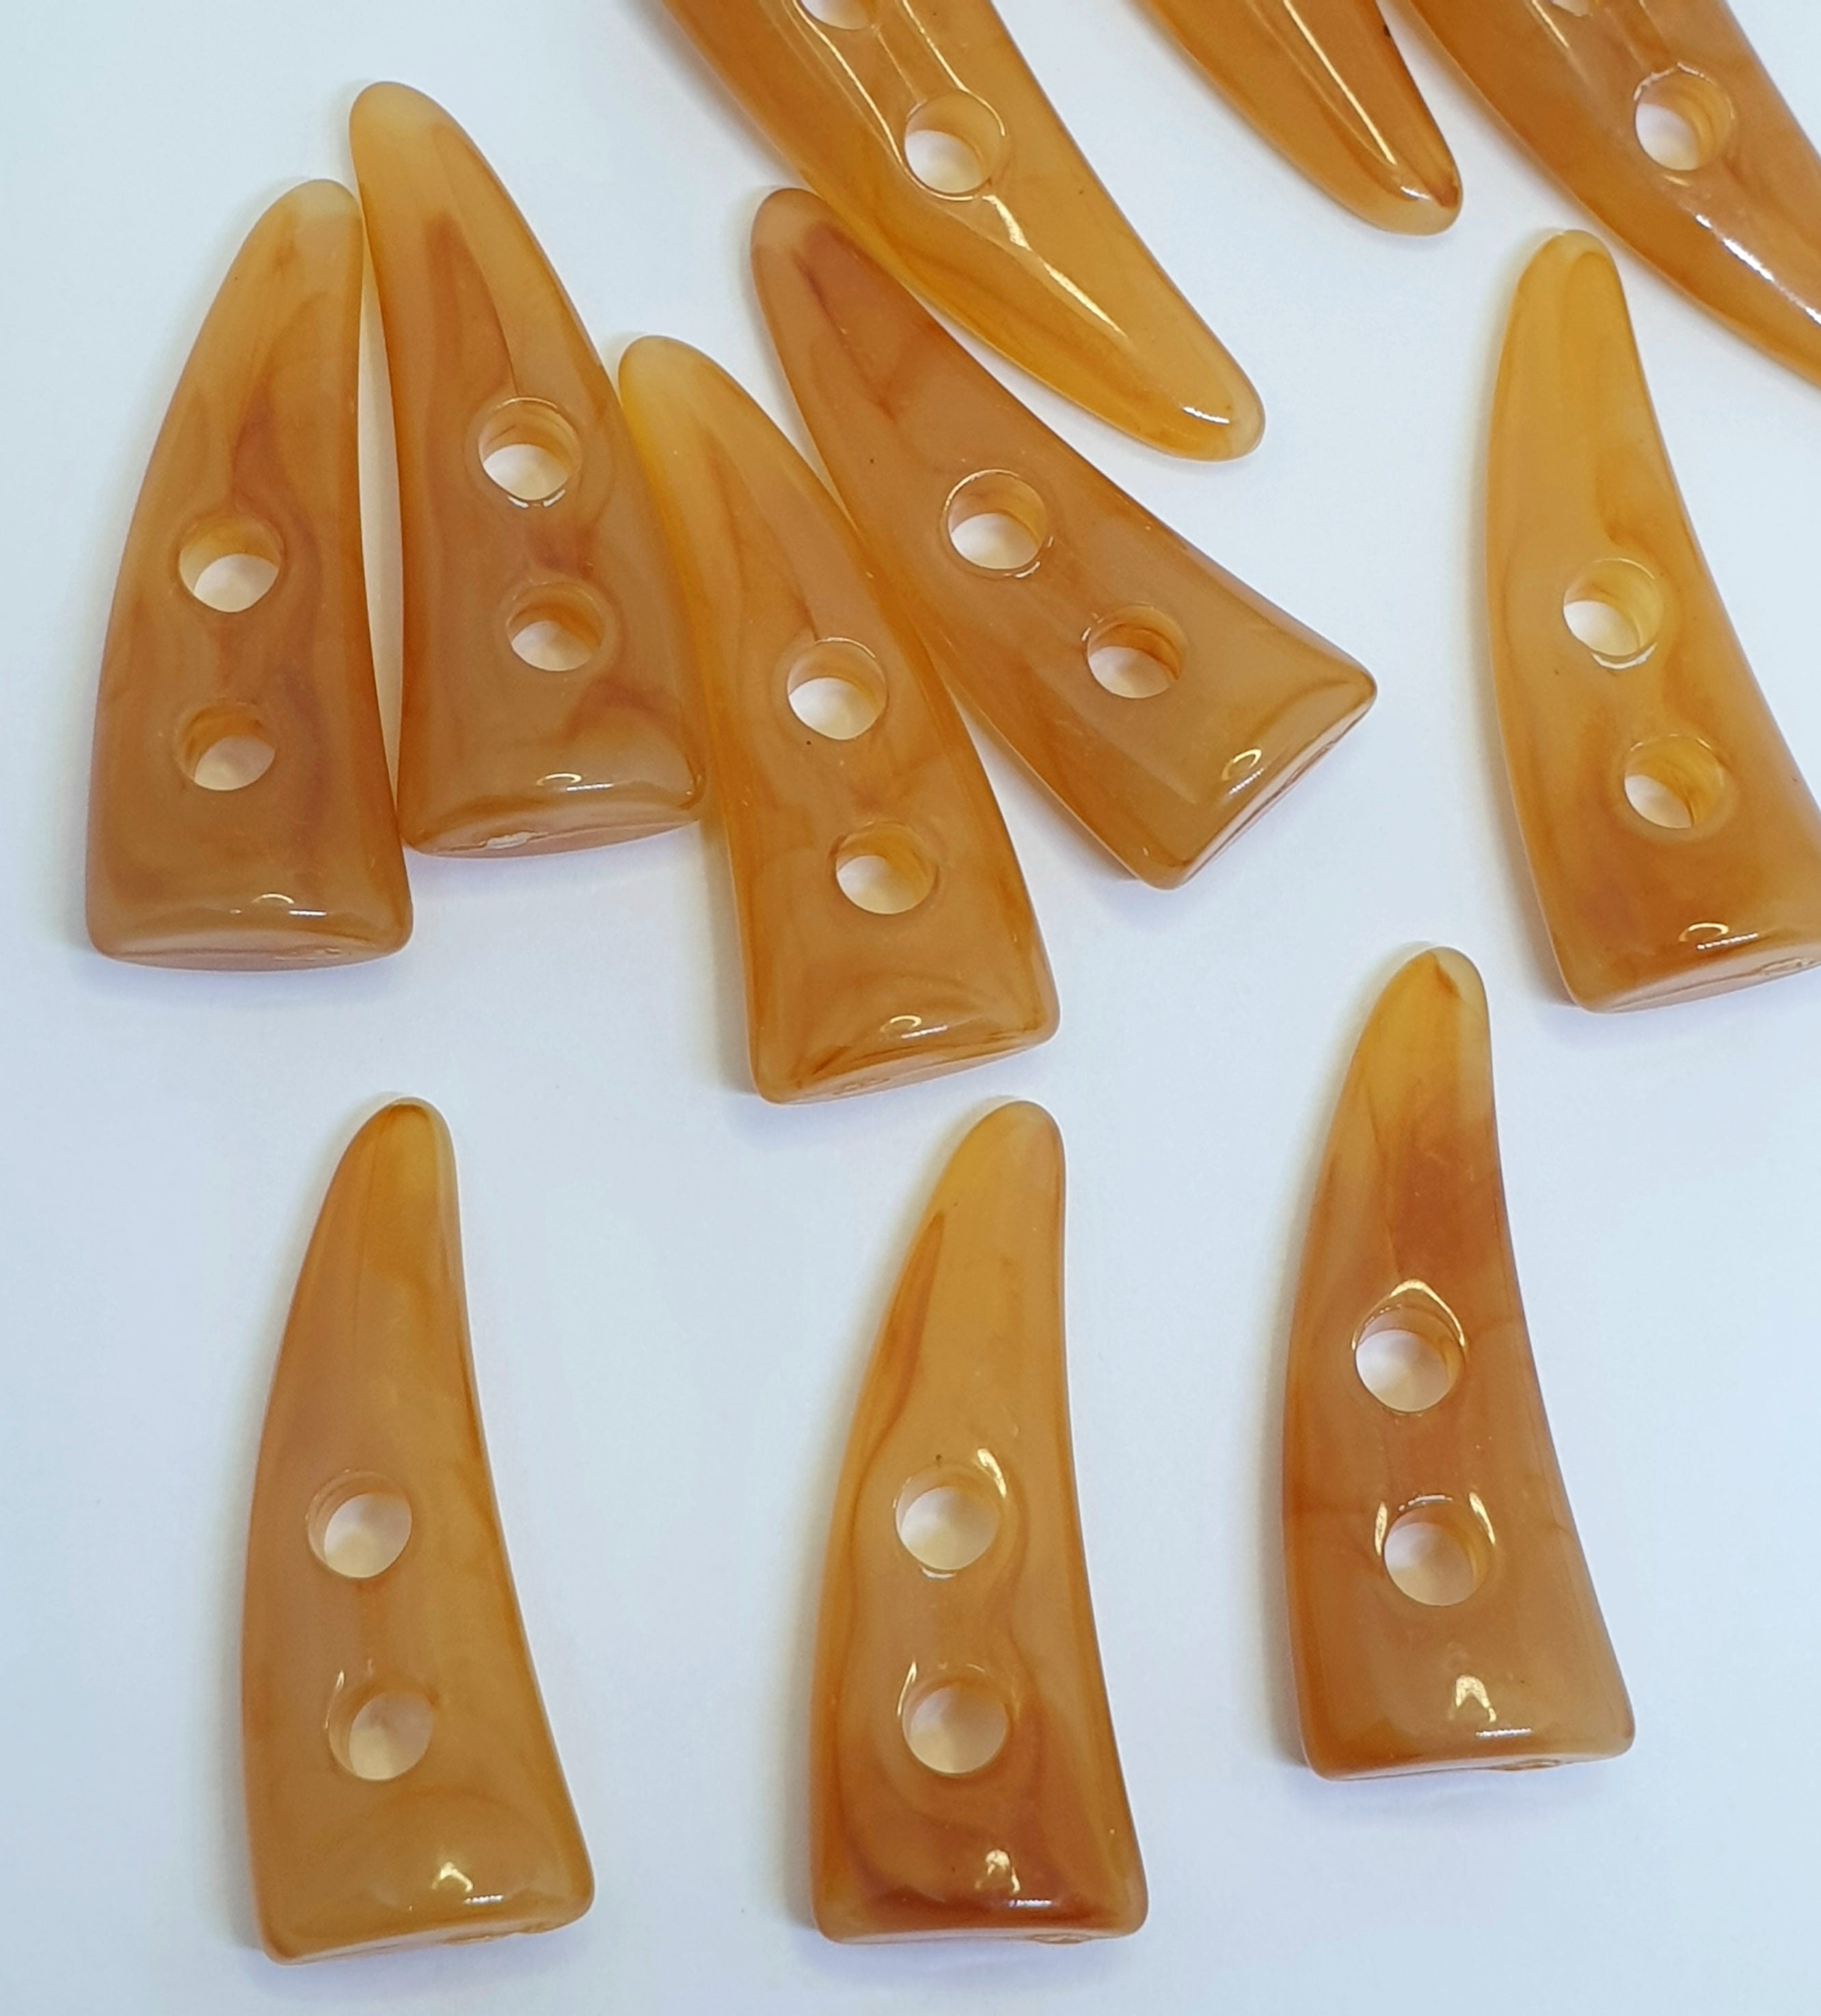 MajorCraft 16pcs 30mm Golden Brown Horn/Tooth Shaped 2 Holes Sewing Toggle Acrylic Buttons